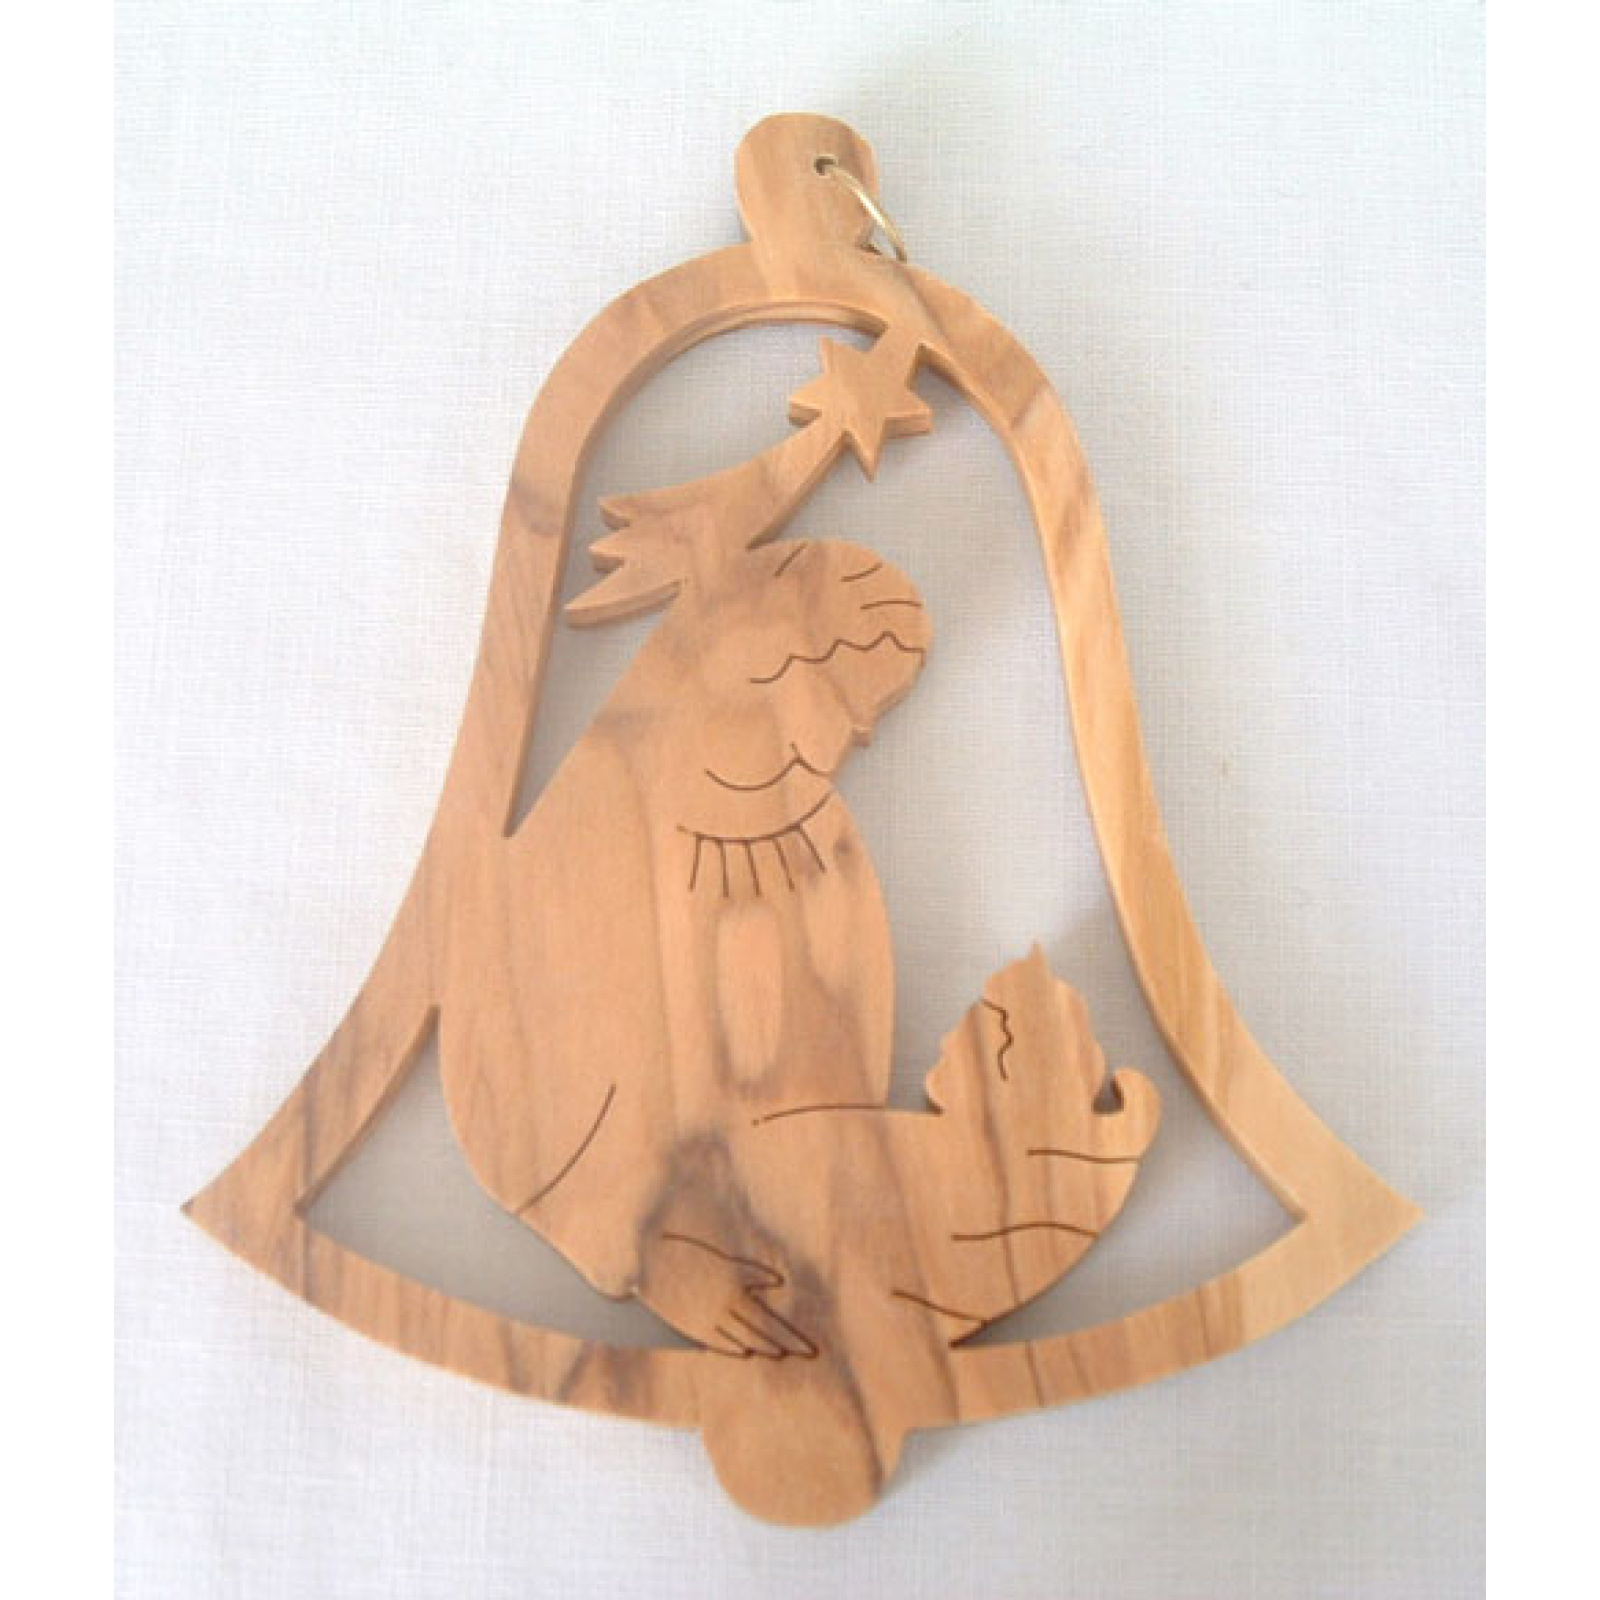 Madonna and child ornament